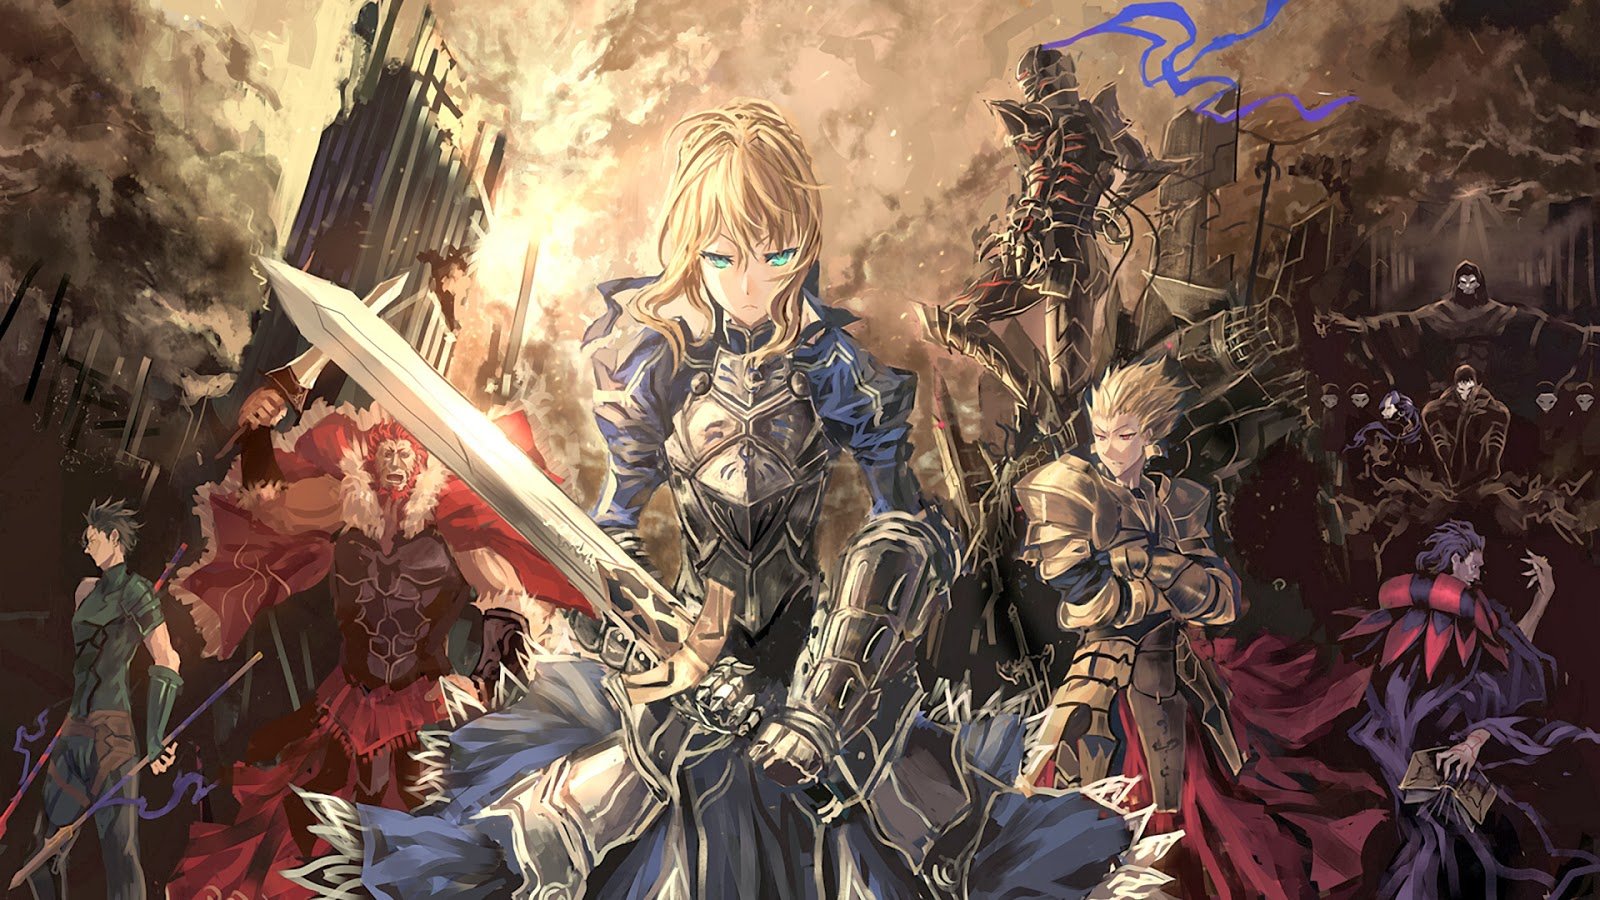 fate stay night wallpaper anime saber gilgames armor knight sword